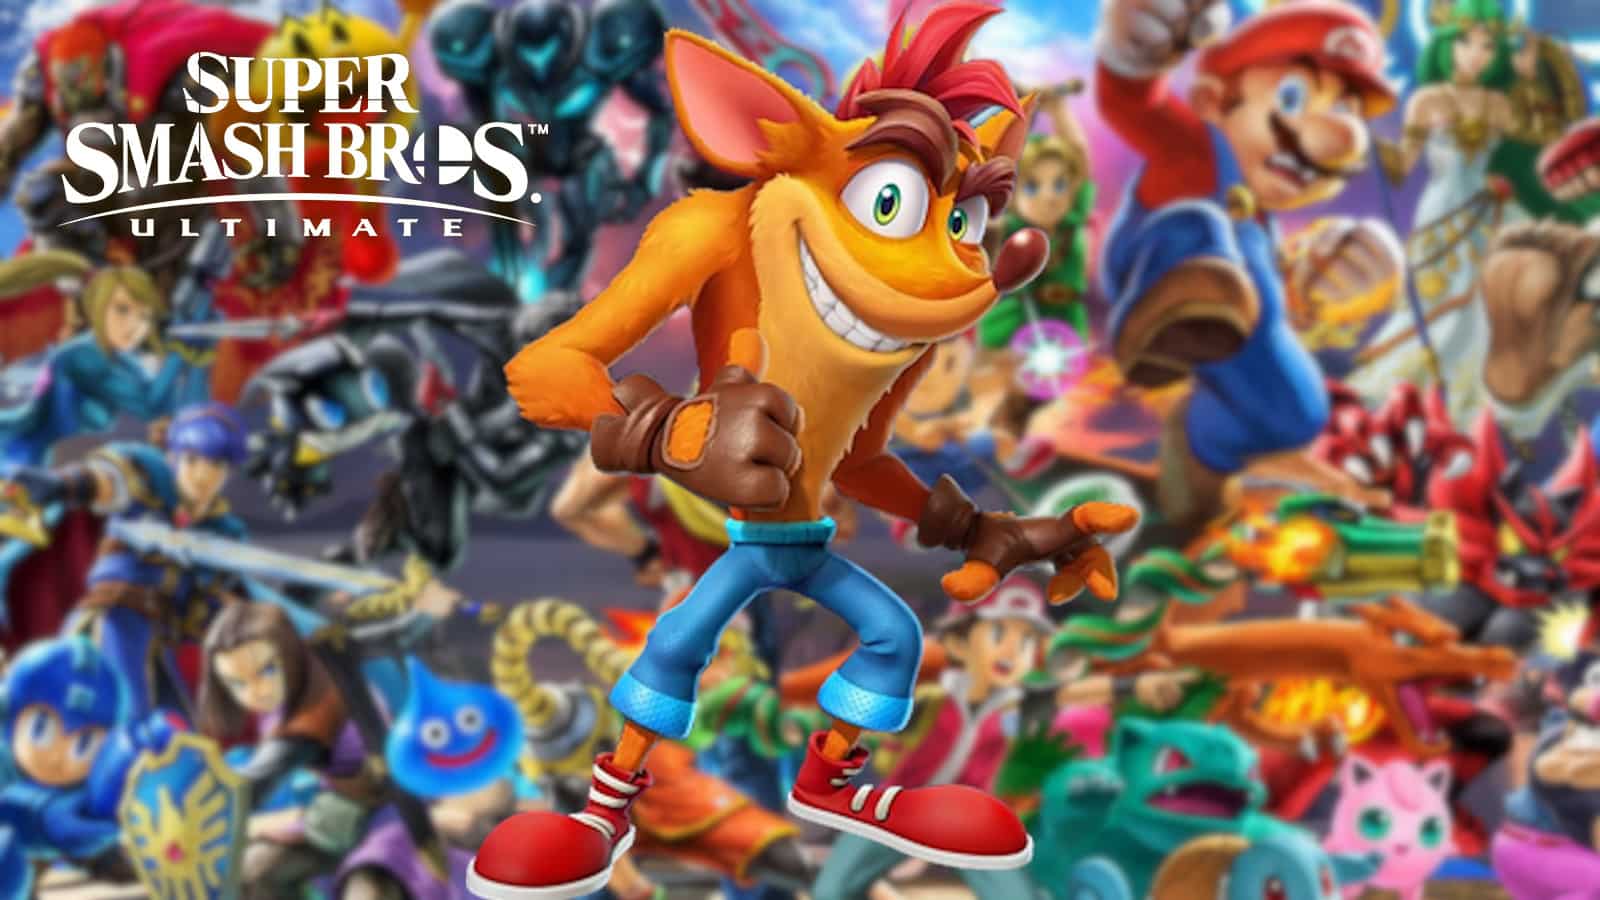 Crash Bandicoot is reportedly coming to Super Smash Bros. Ultimate